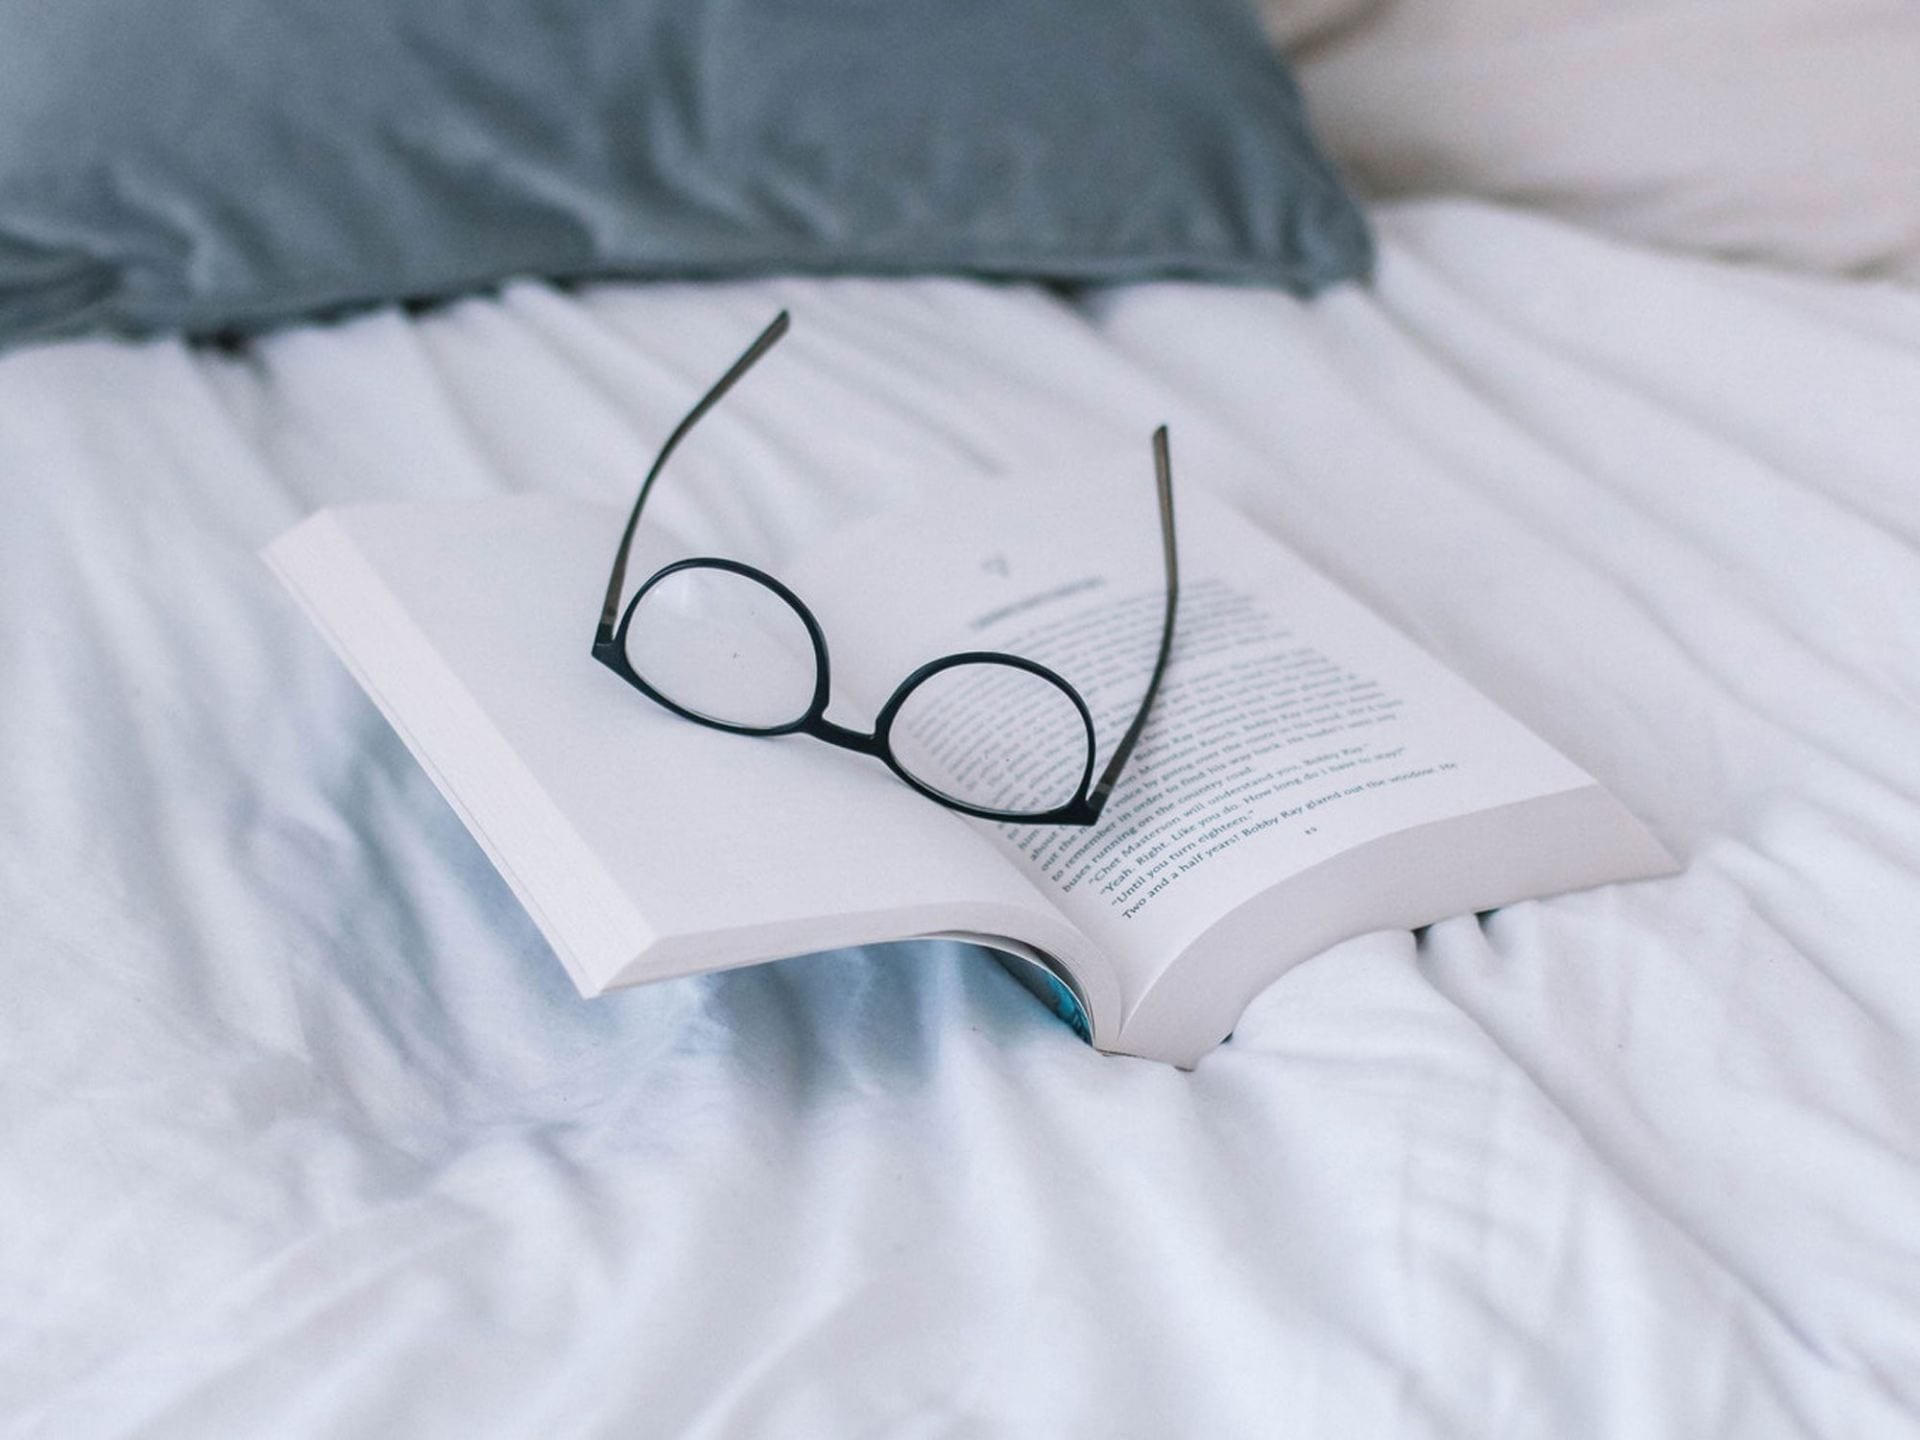 A pair of glasses lying on a book on top of a bed